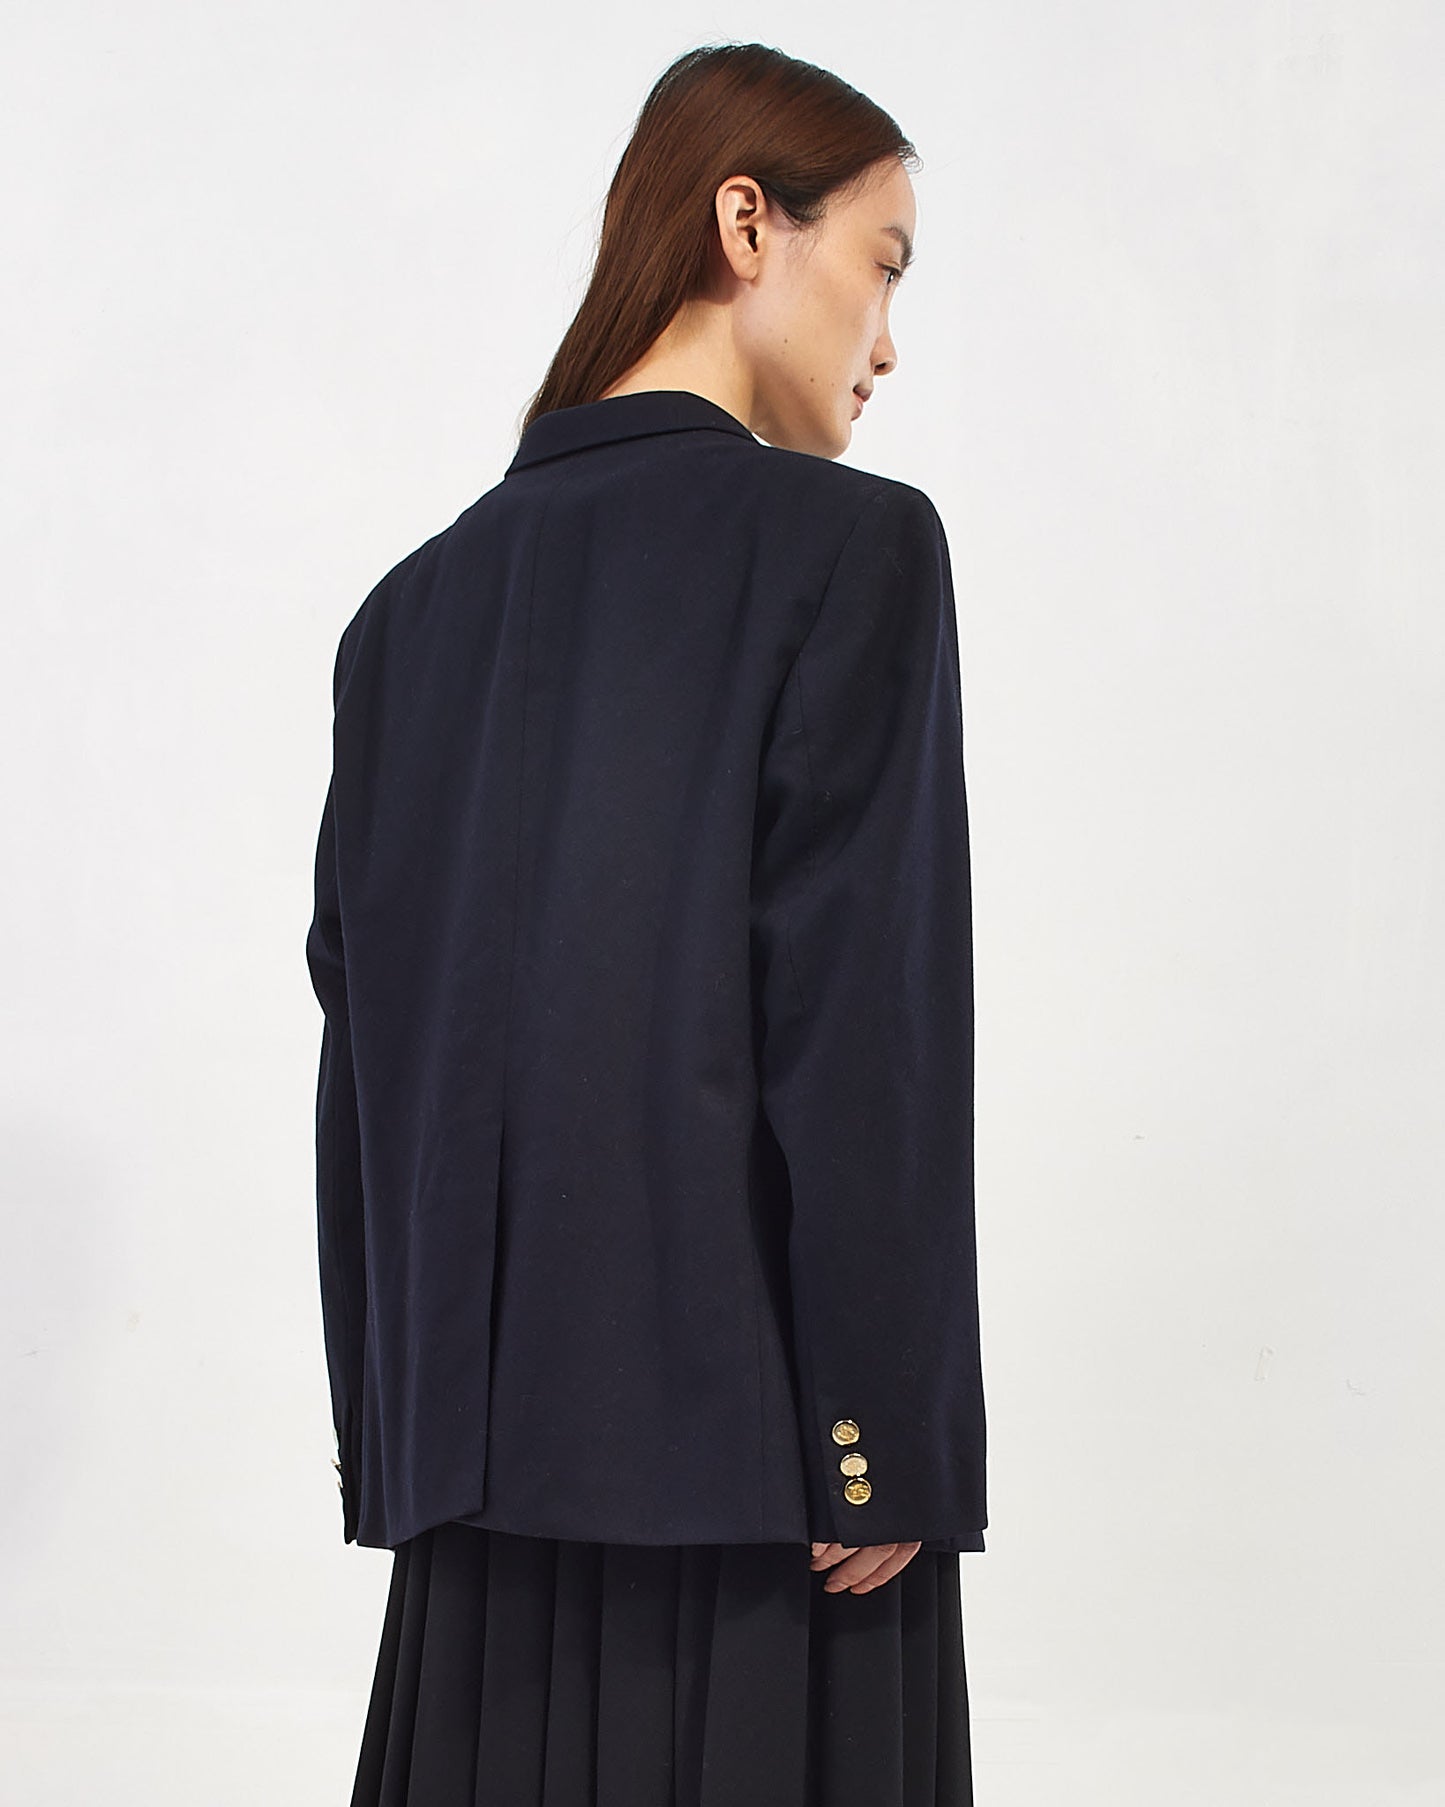 Burberry Navy Wool Oversized Double Breasted Blazer - L/XL